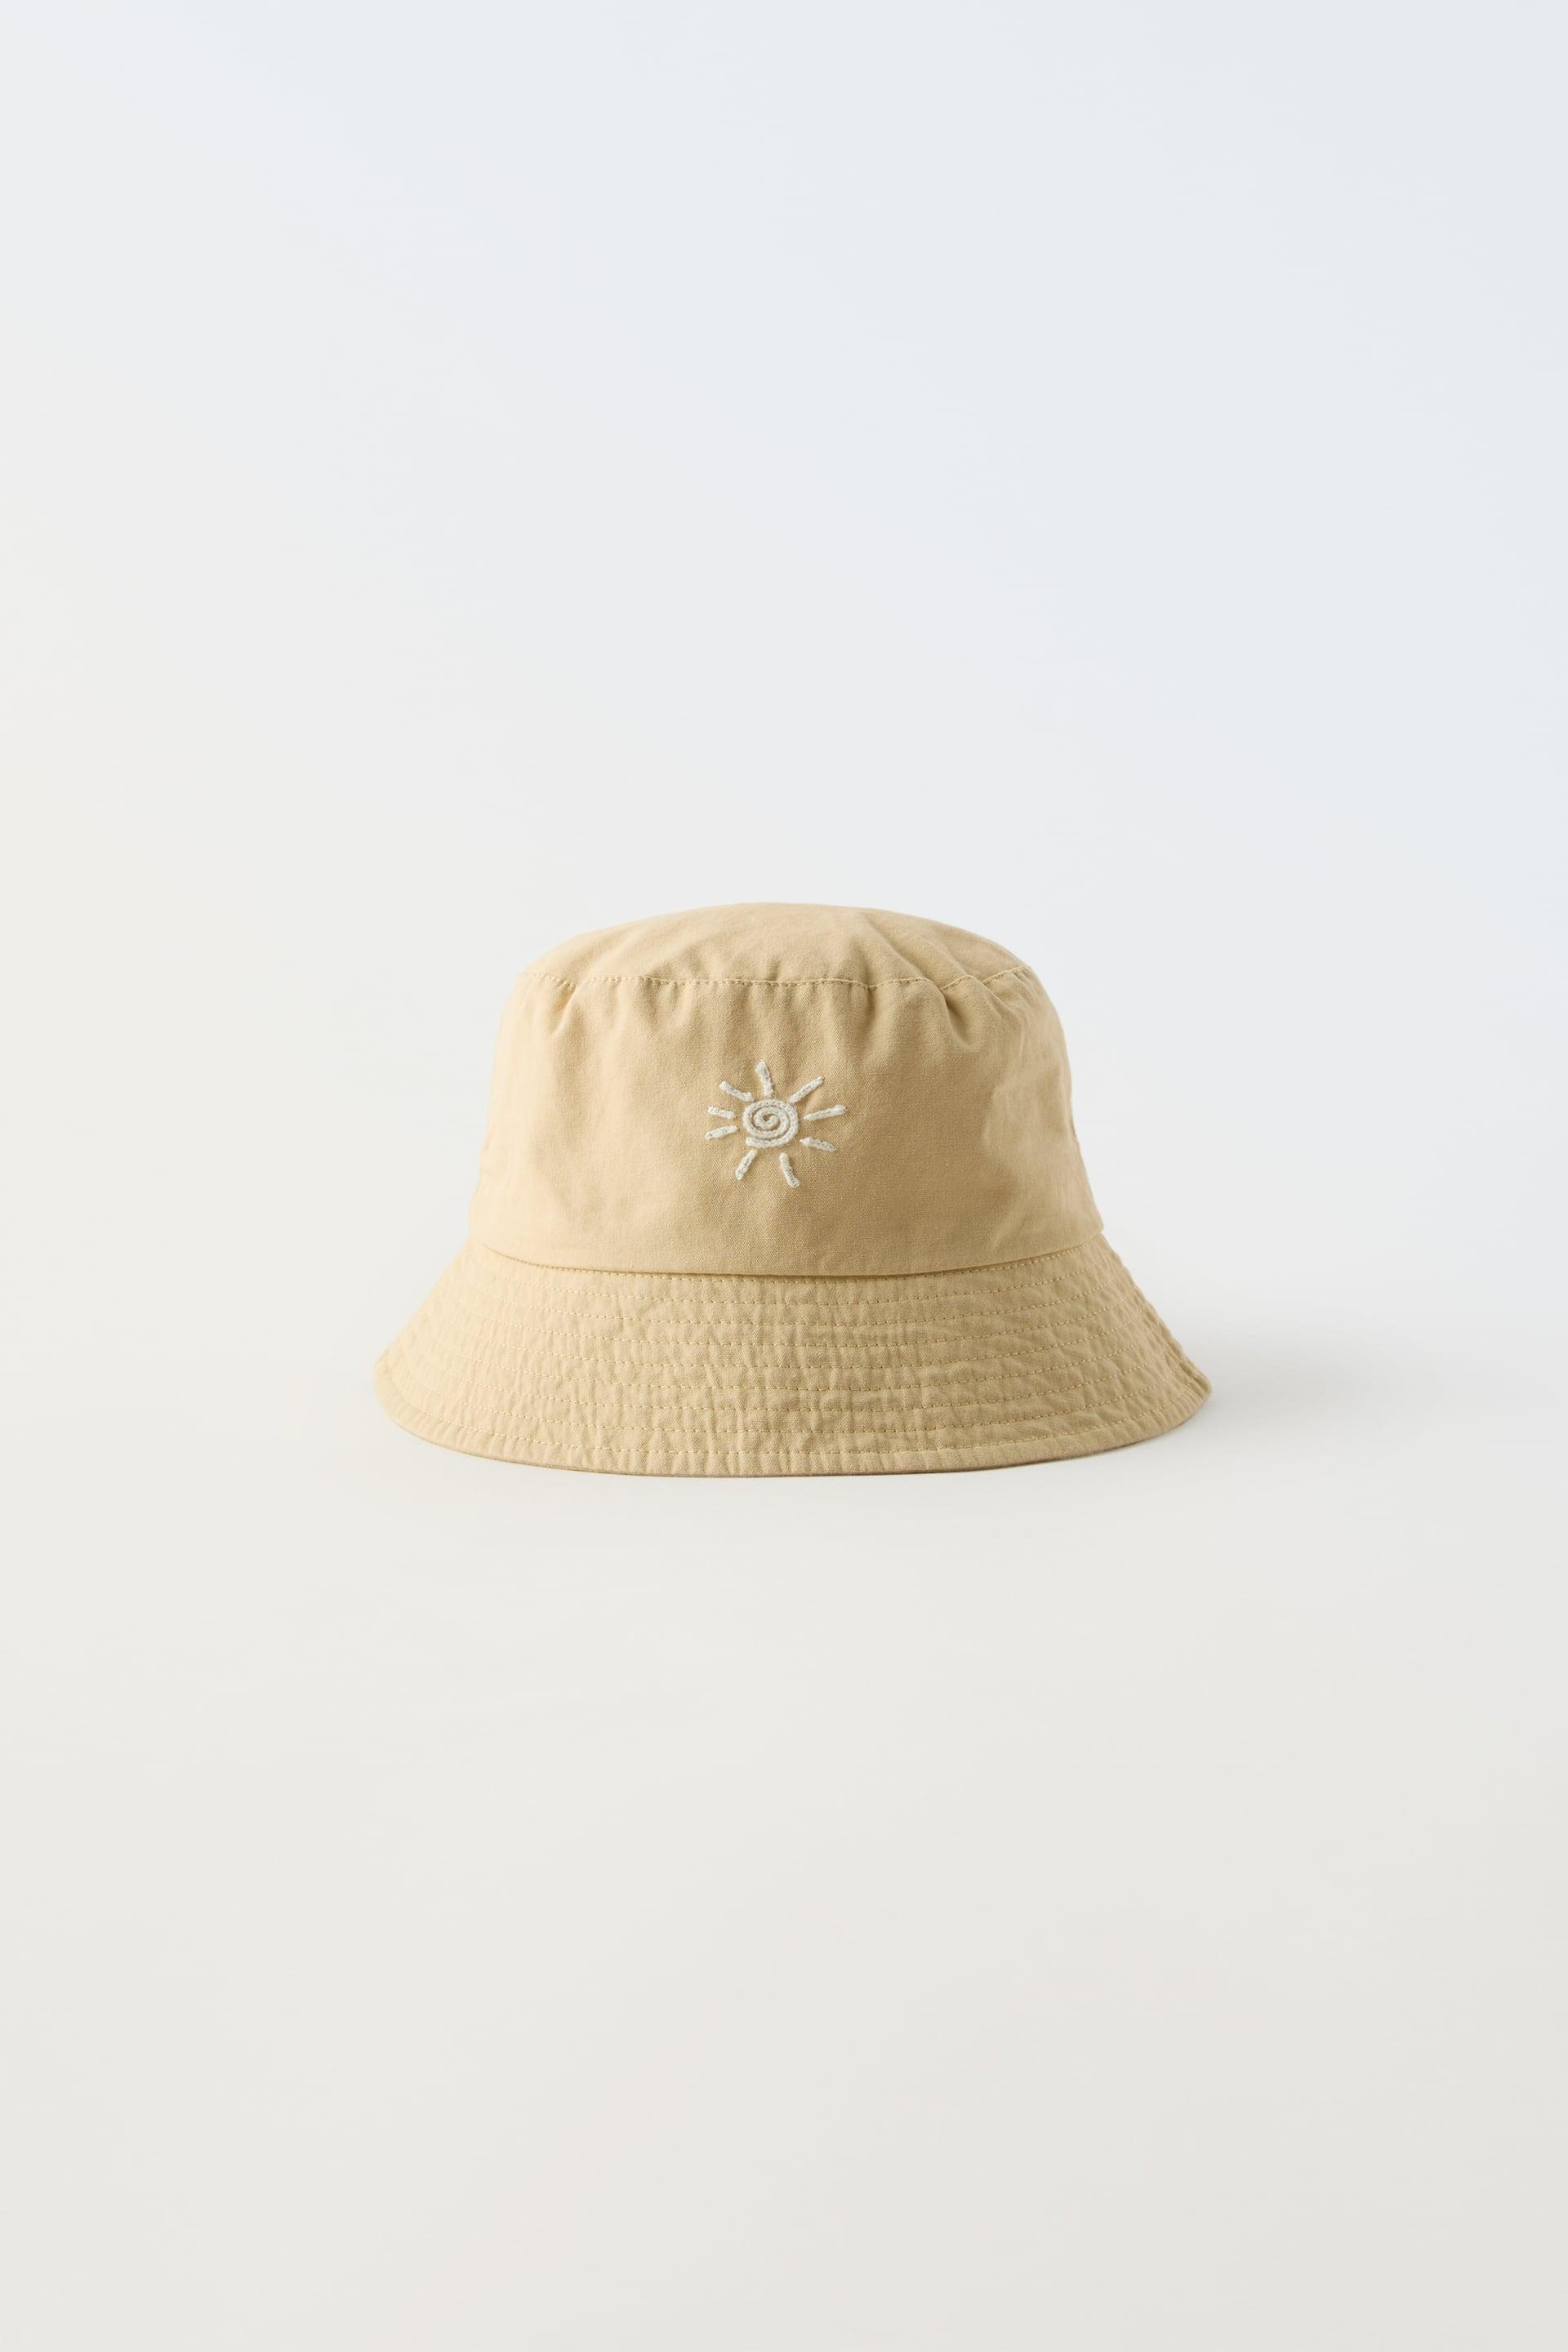 EMBROIDERED HAT by ZARA